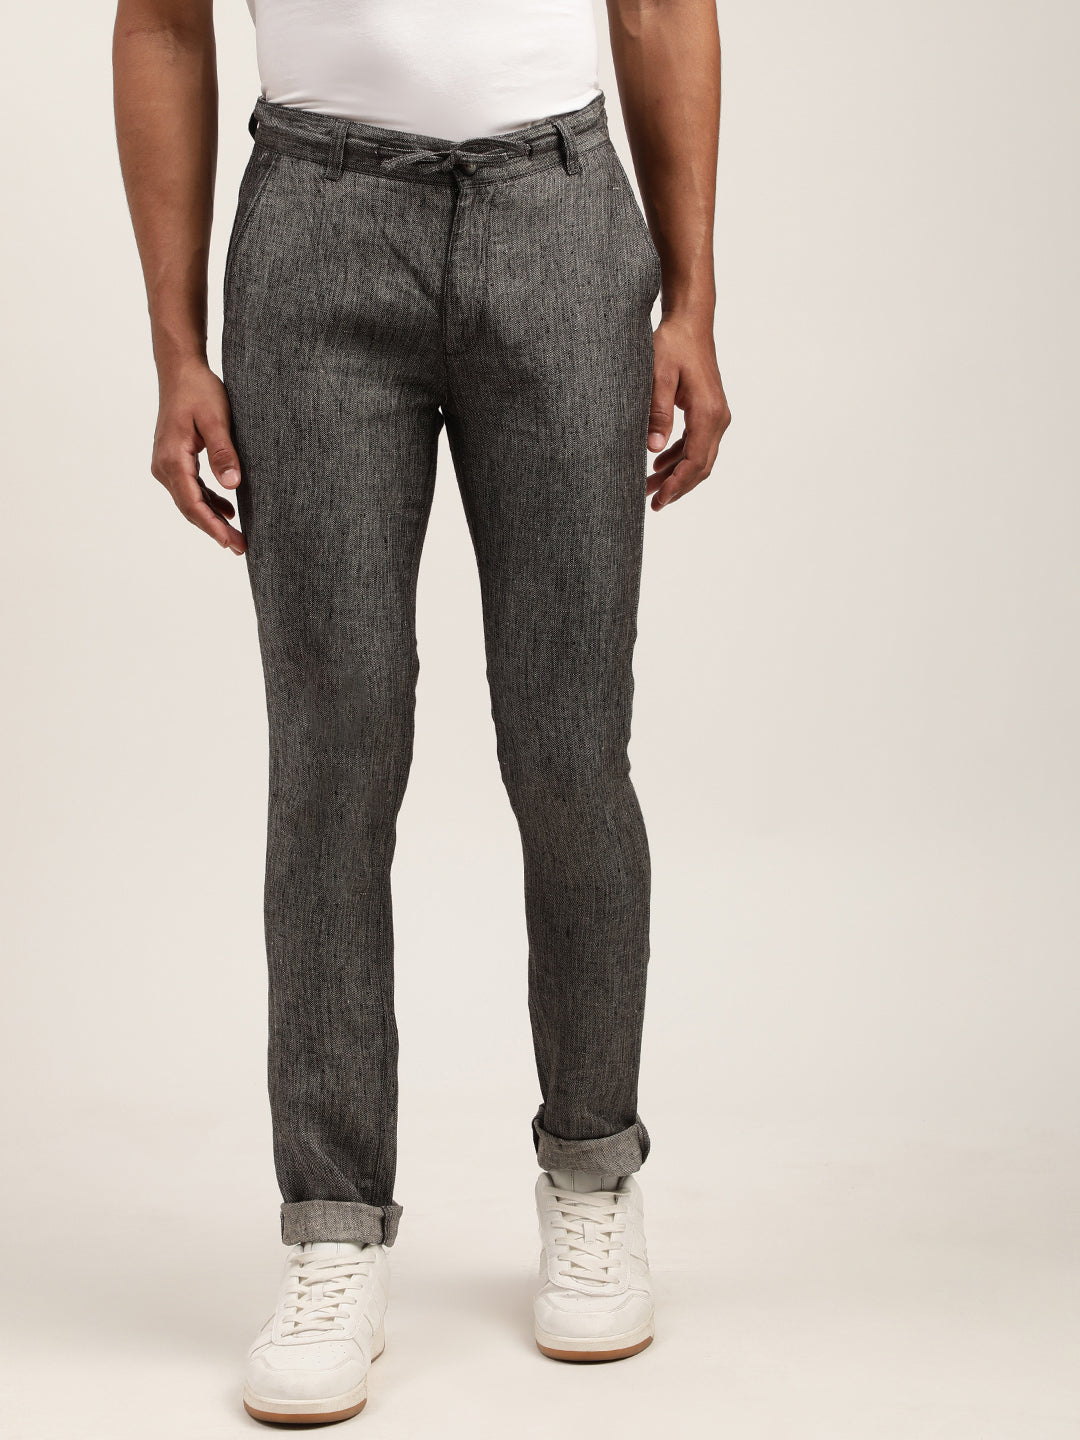 Charcoal Grey Trousers  Buy Charcoal Grey Trousers online in India